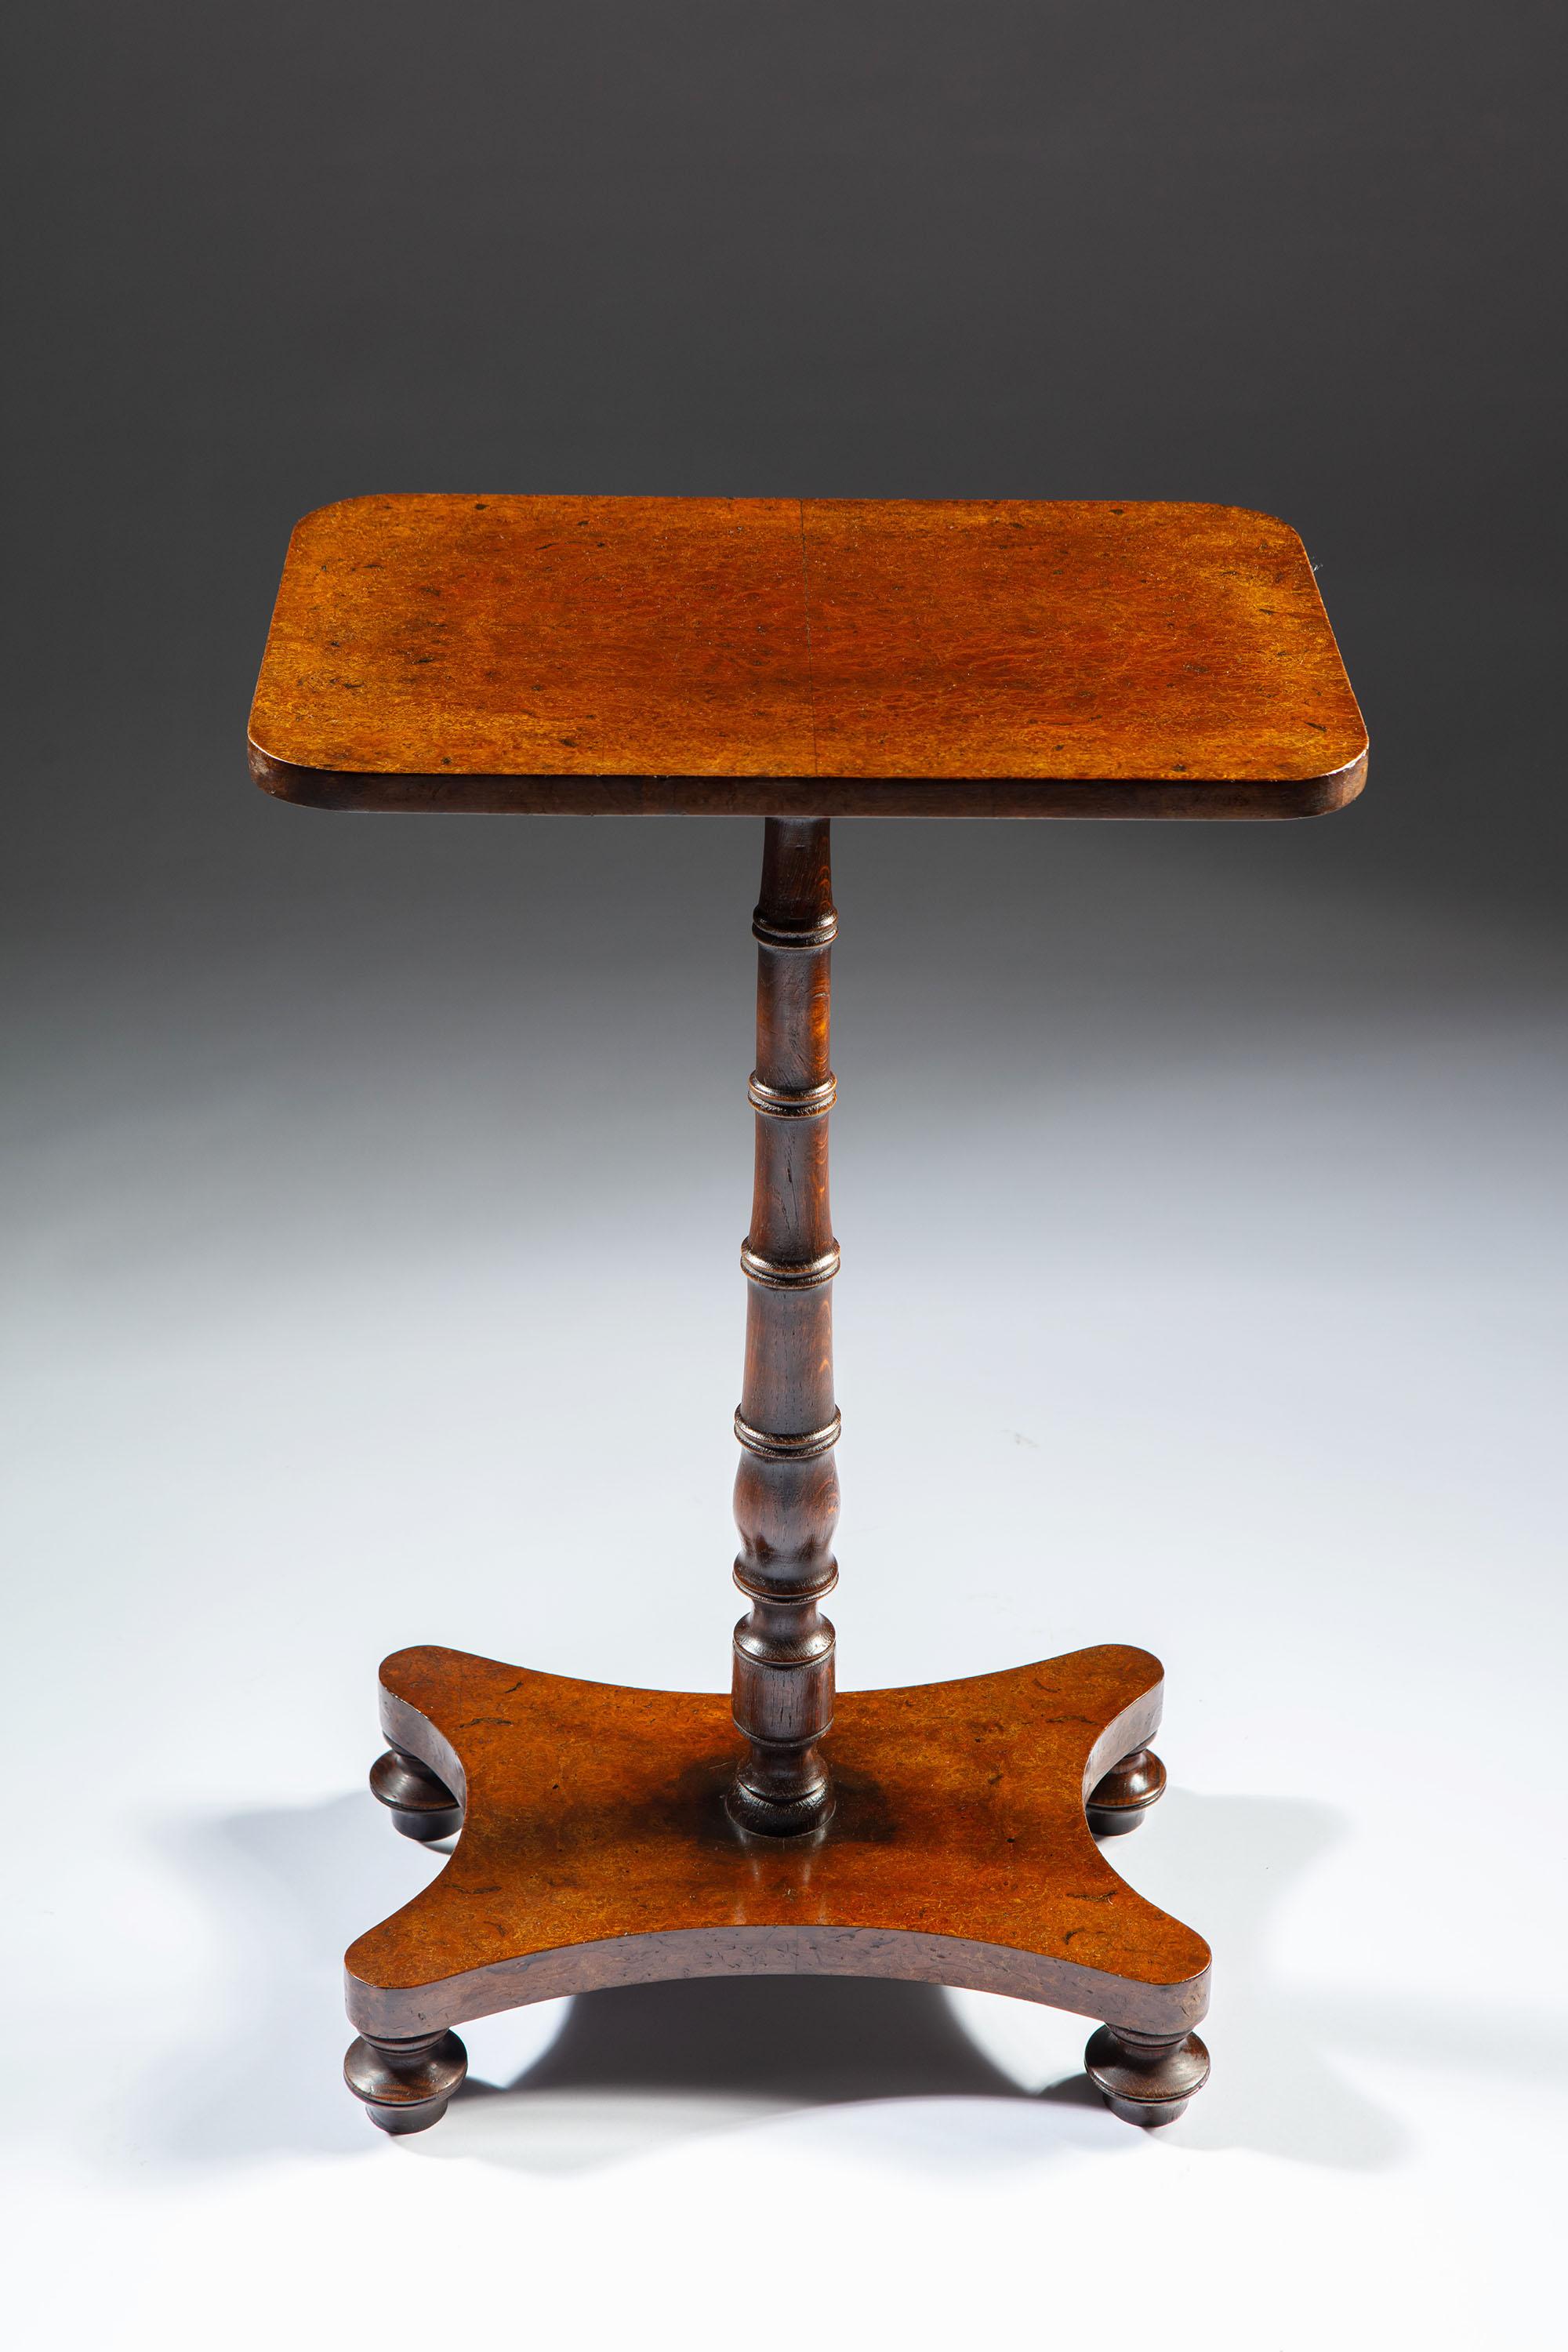 A pair of Edwardian burr oak occasional tables, with rectangular tops and turned stems supported on a quadruped base.